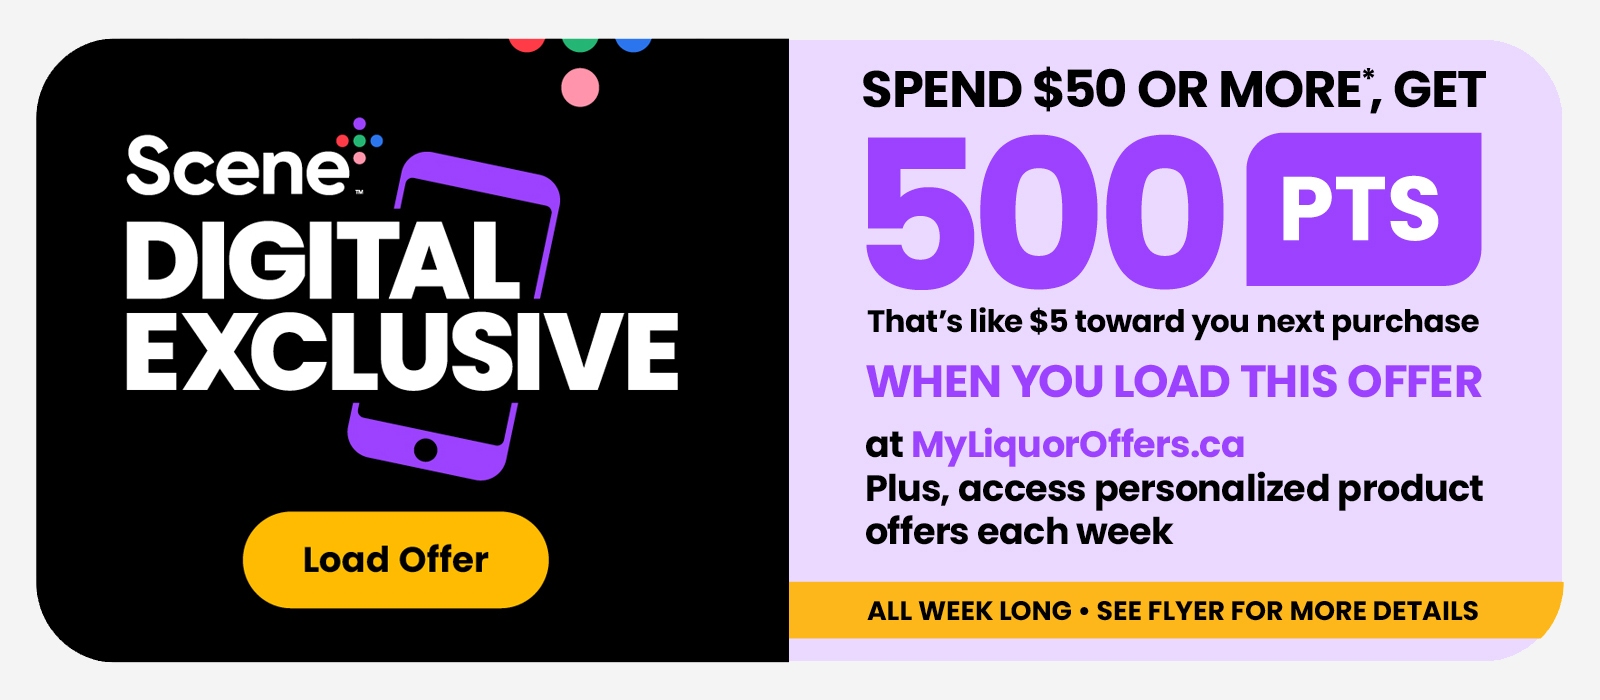 Scene+ Digital Exclusive! Load It to Get It! Spend $50 or more, get 500 PTS when you load this offer at MyLiquorOffers.ca. See flyer for more details.